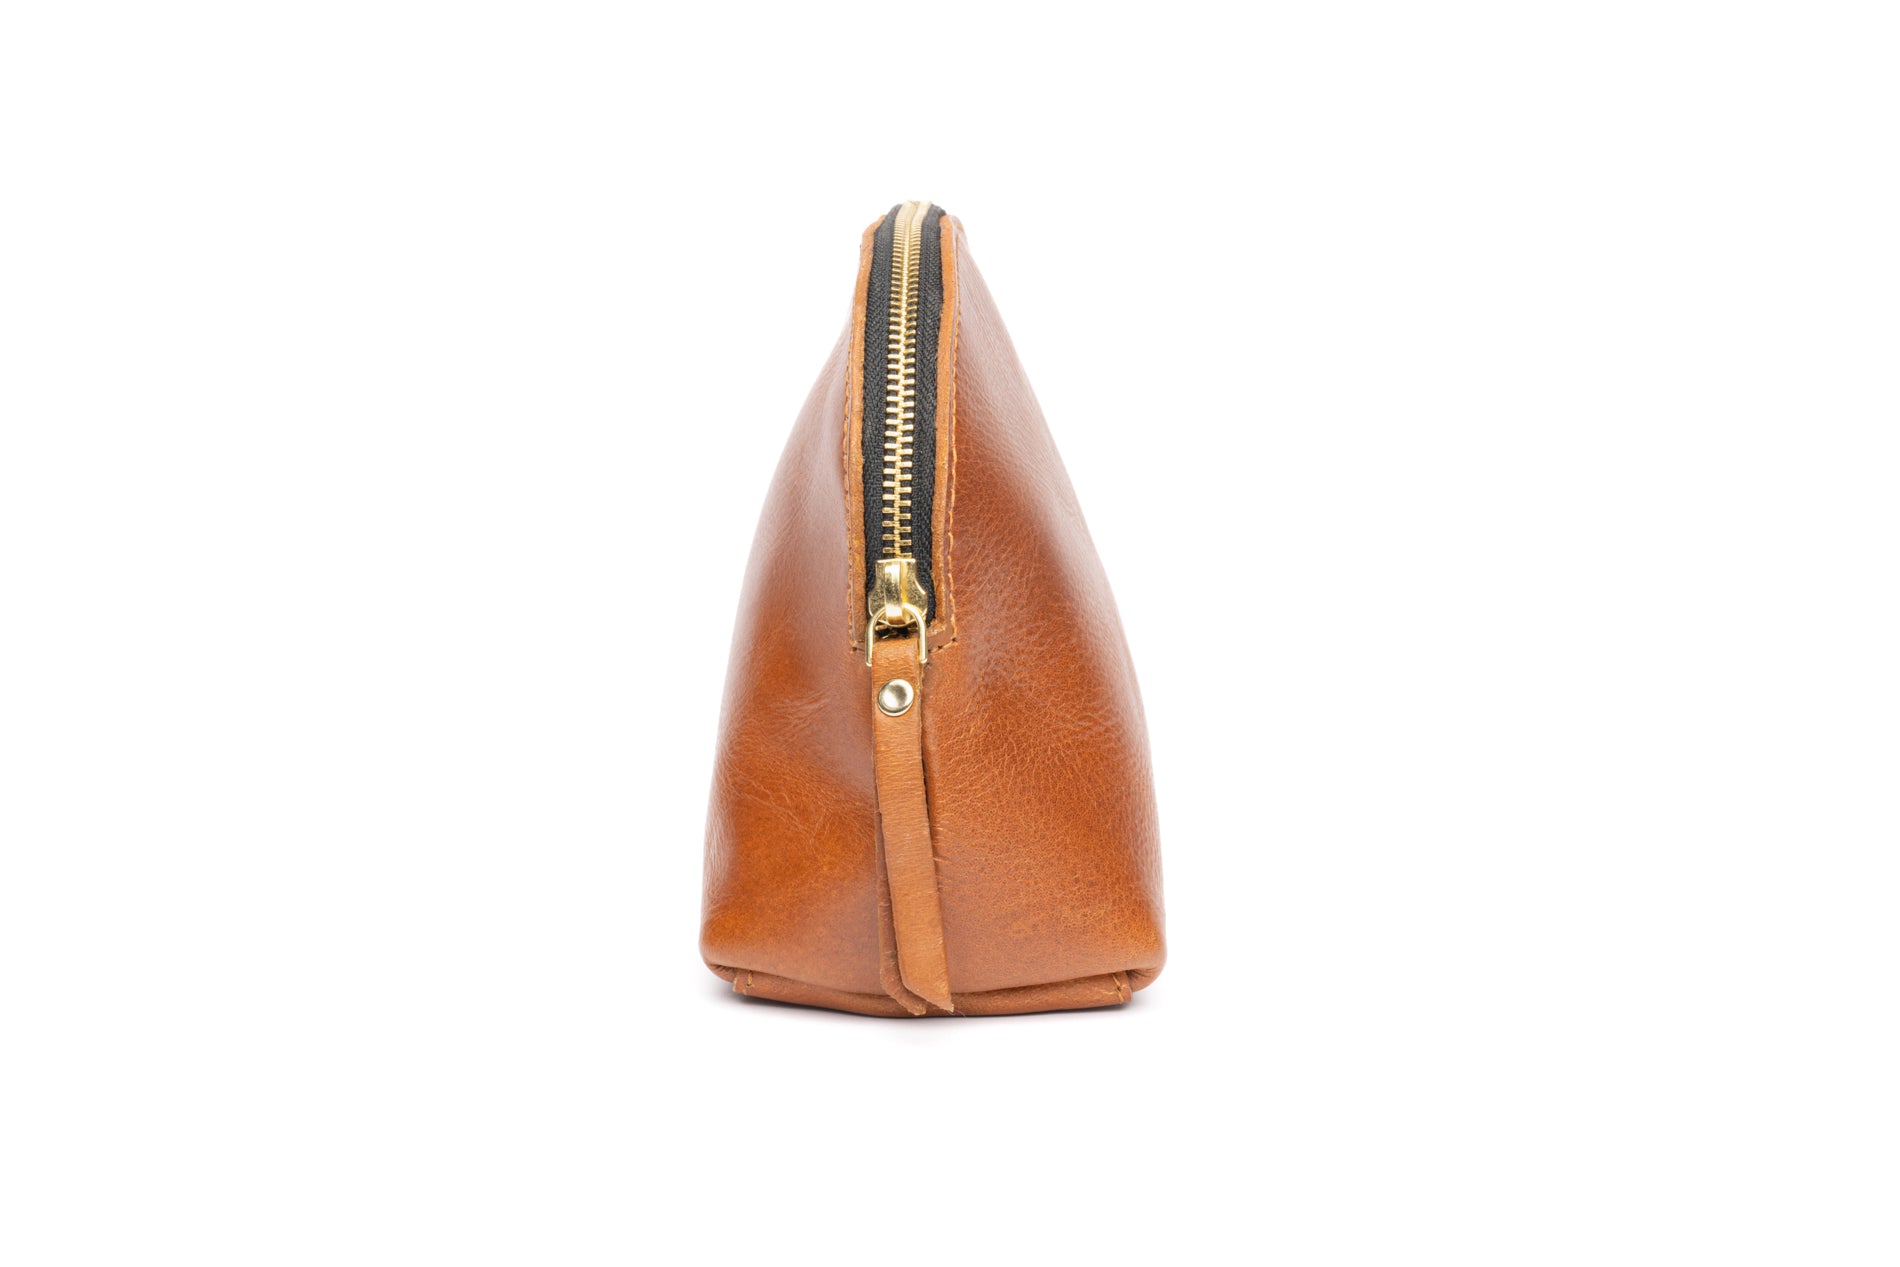 Side view of Stylish fashionable brown leather makeup bag that is fair trade